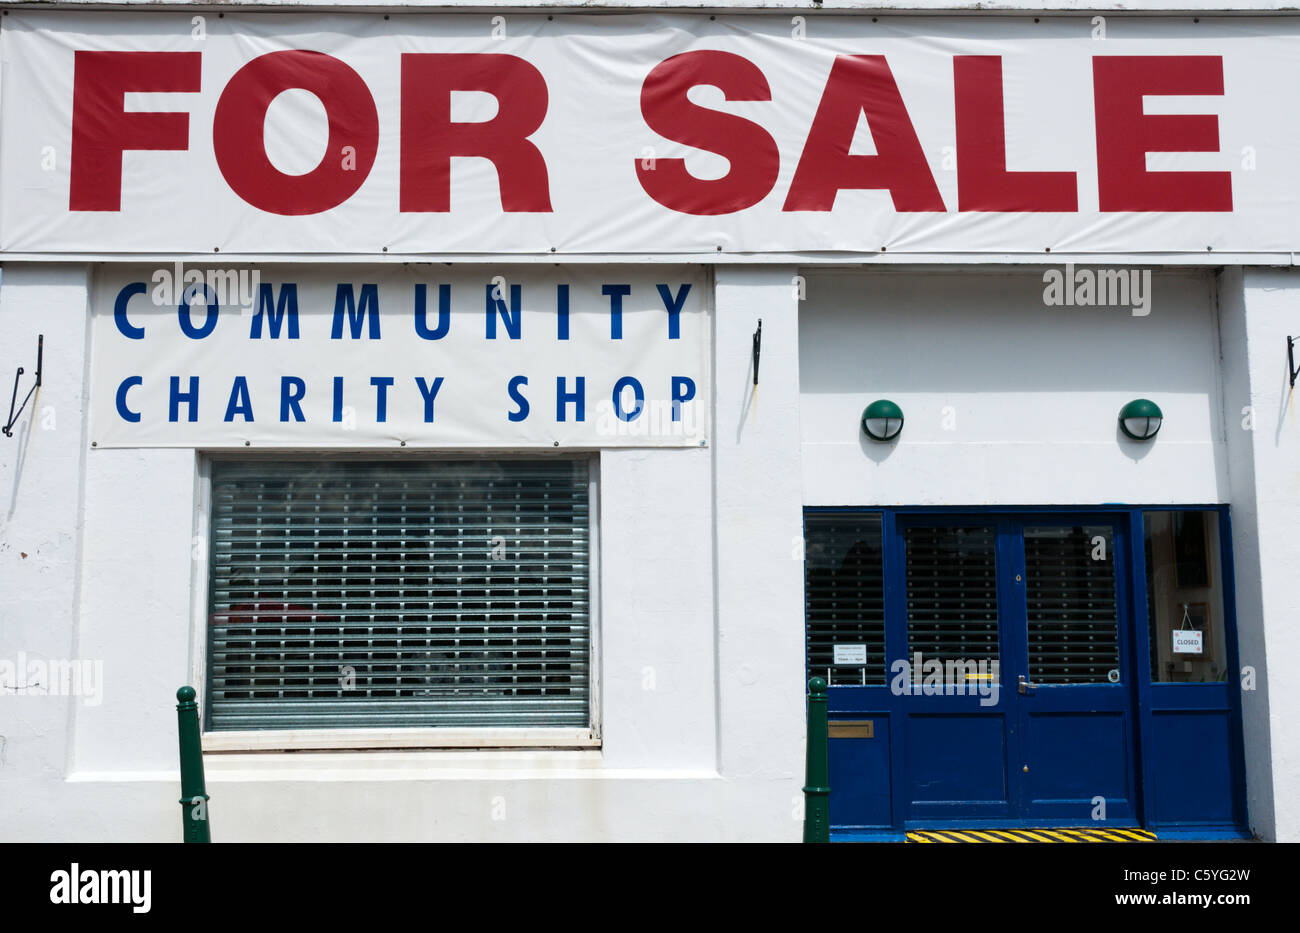 For Sale and Community Charity Shop signs Stock Photo